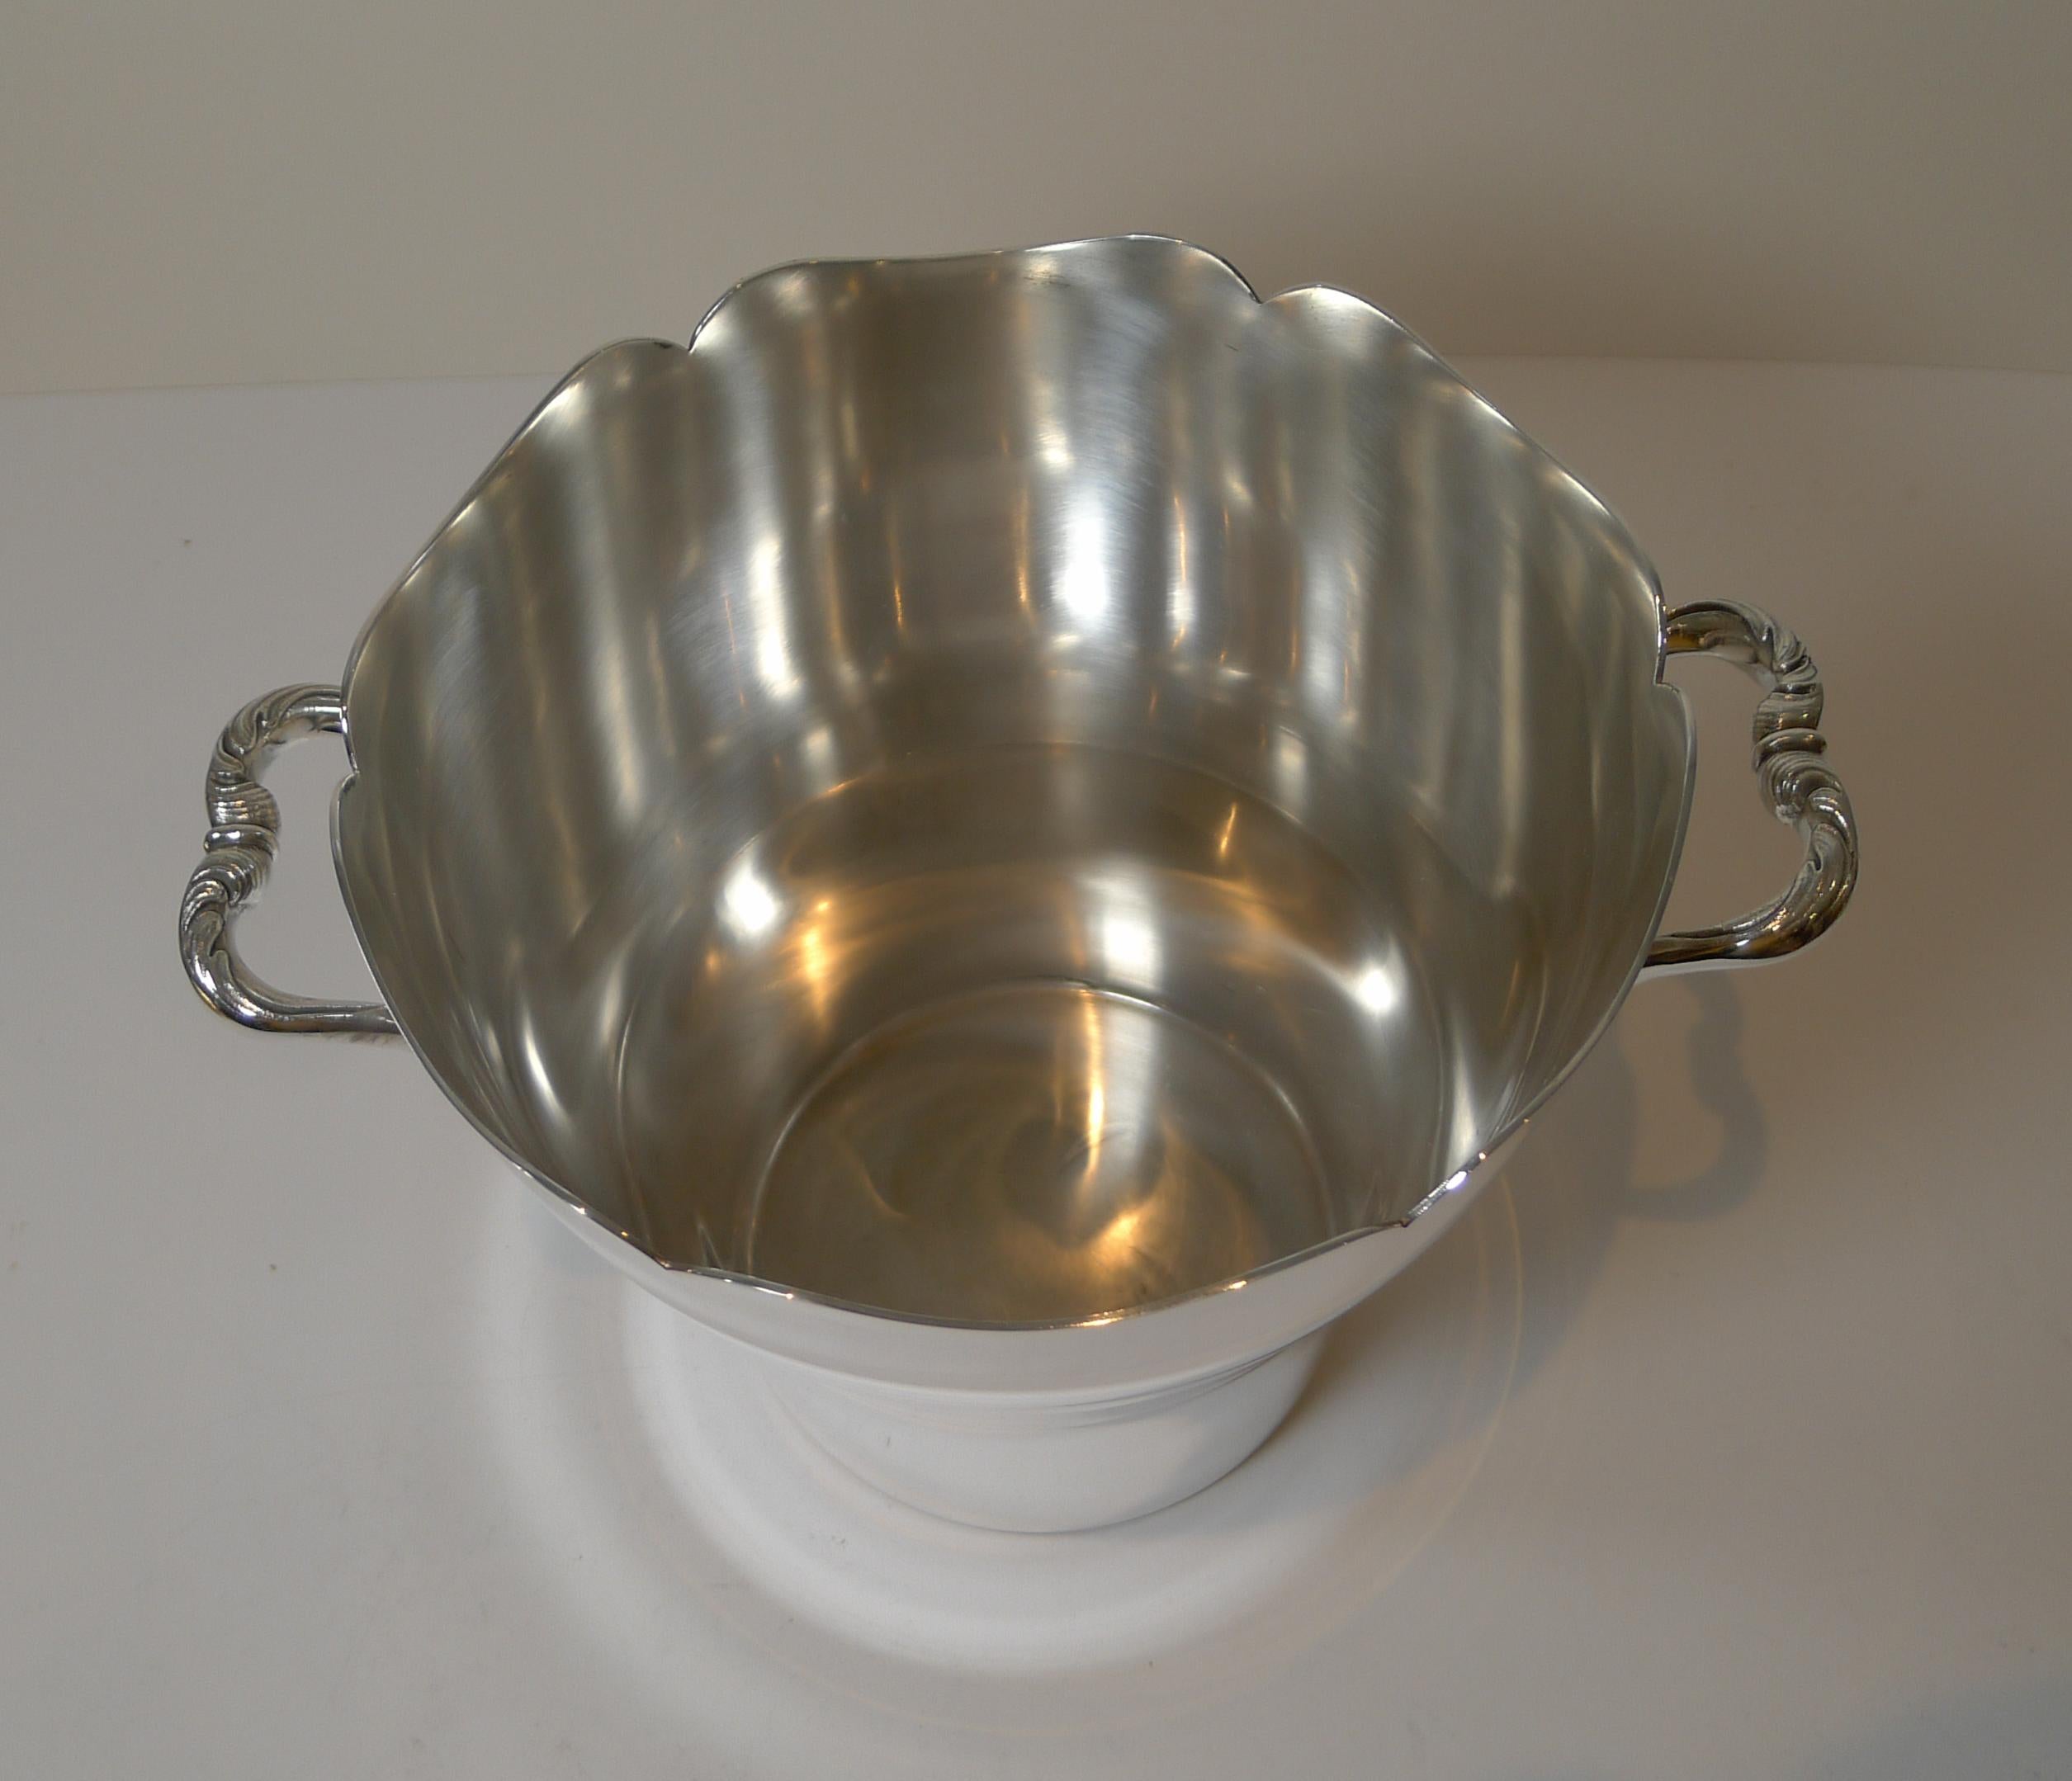 A very fine early twentieth century Champagne bucket; a beautiful shaped body with a scallopped rim and very stylish handles.

The underside is signed by the top-notch Parisian silversmith, Cailar & Bayard.

Cailar & Bayard, 37 rue